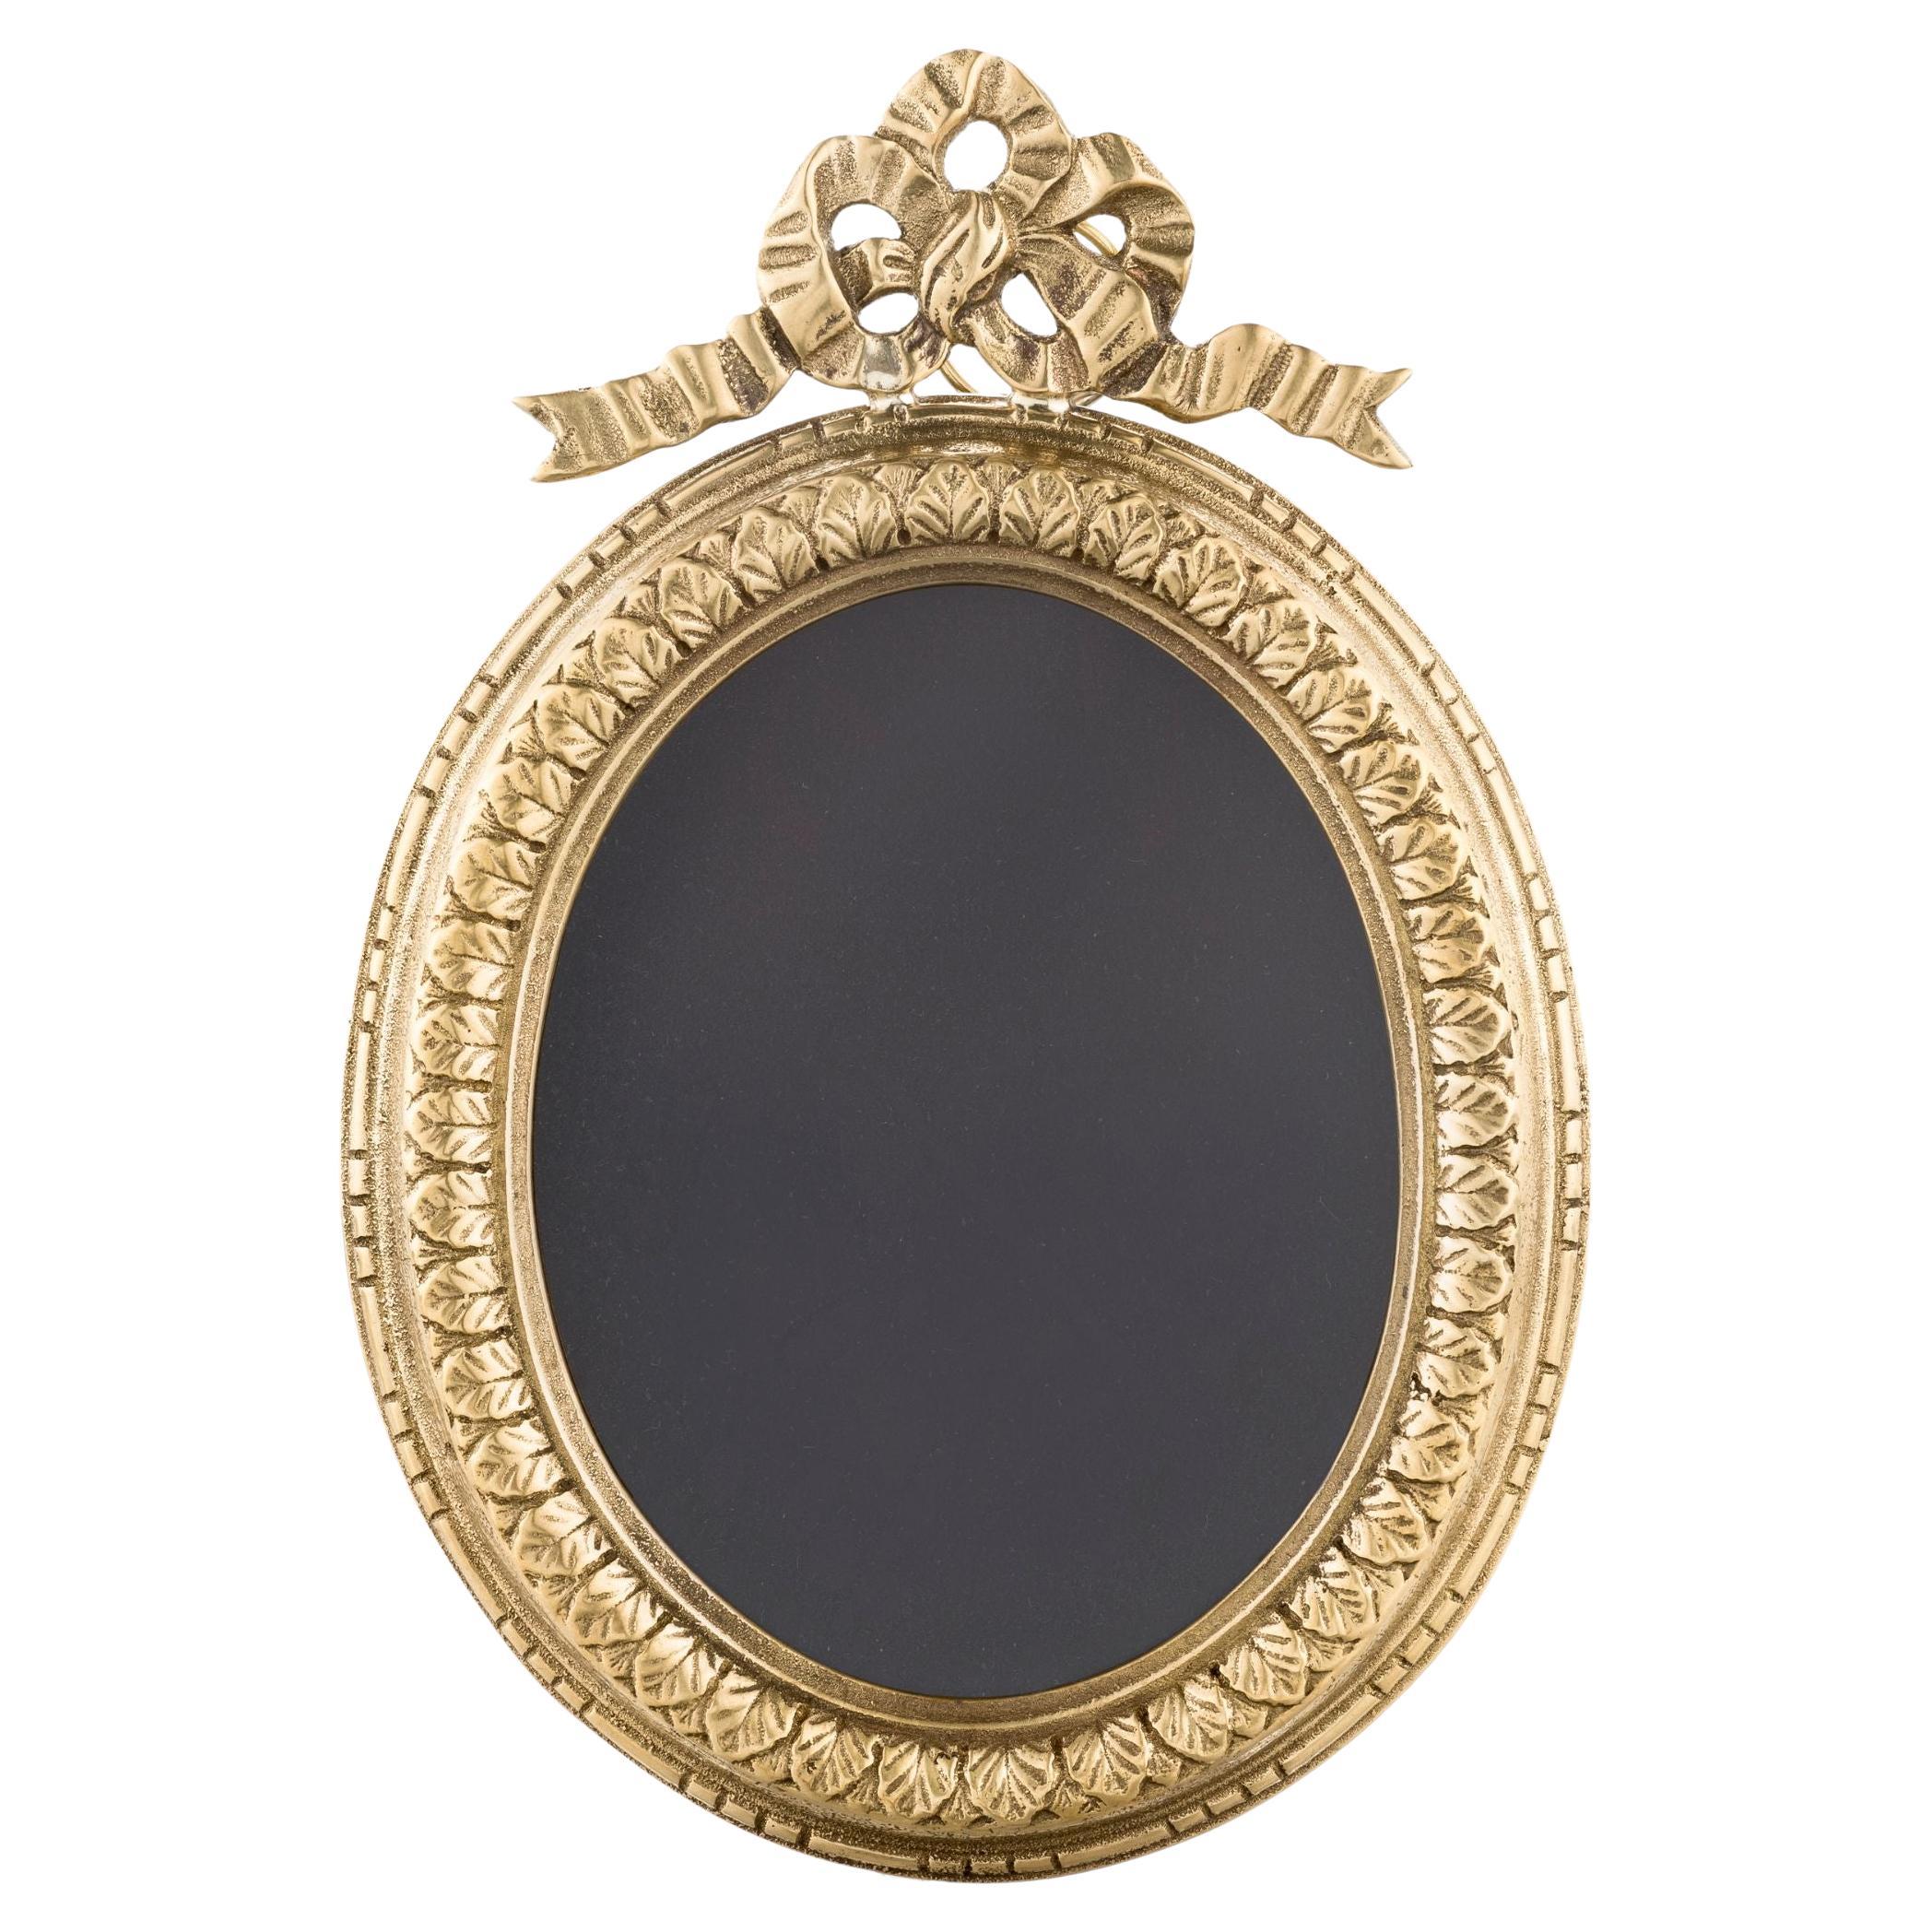 Sissi decorated brass frame with ribbon